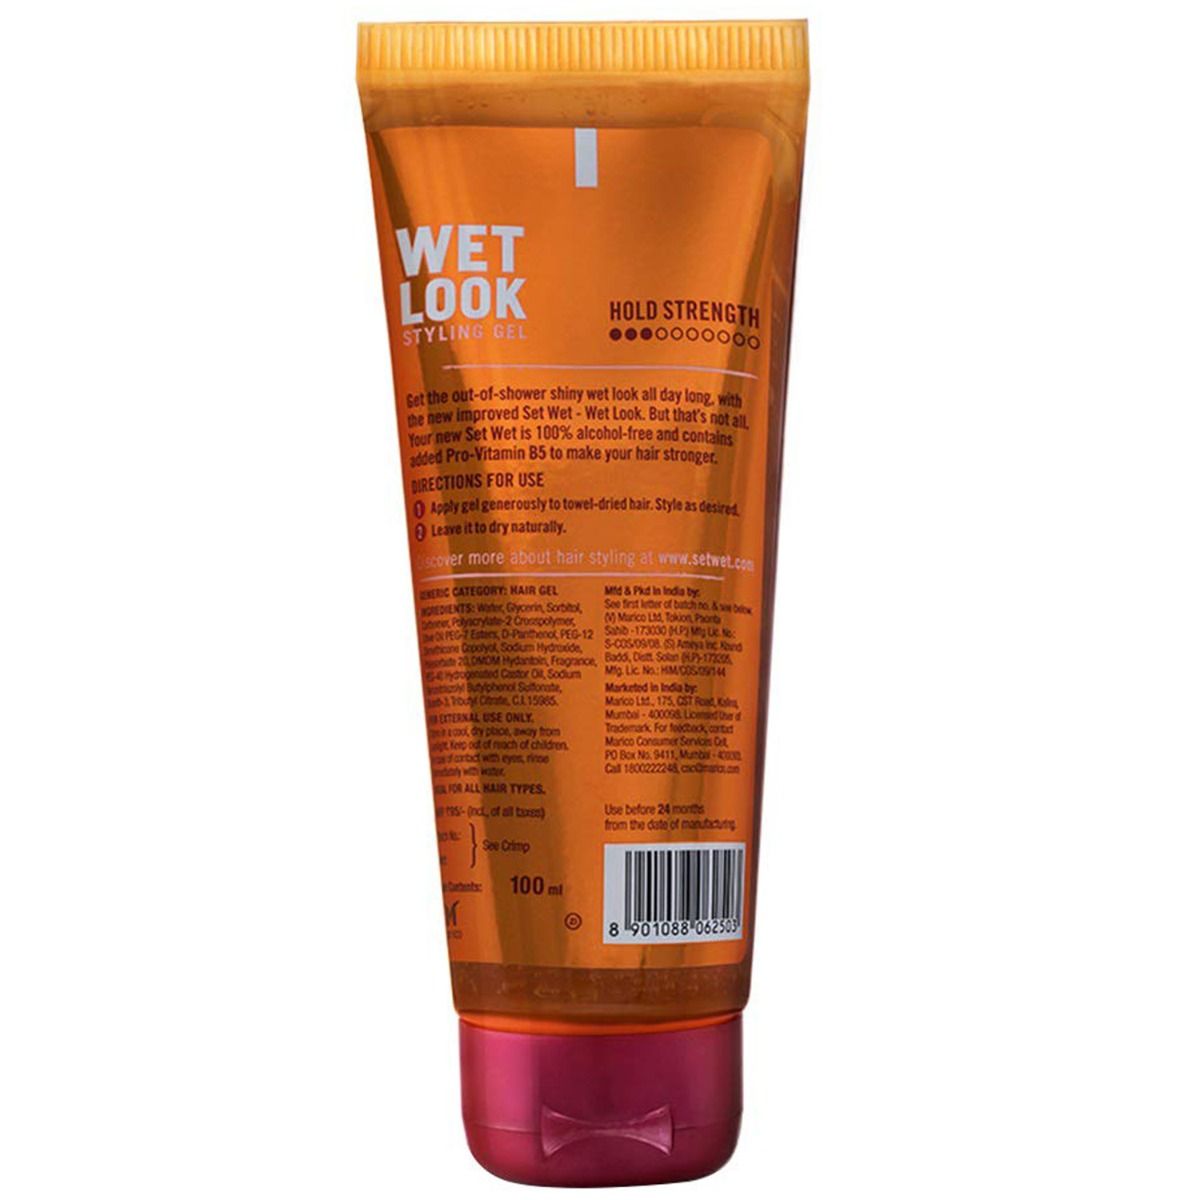 Set Wet Wet Look Hair Styling Gel, 100 ml Price, Uses, Side Effects,  Composition - Apollo Pharmacy